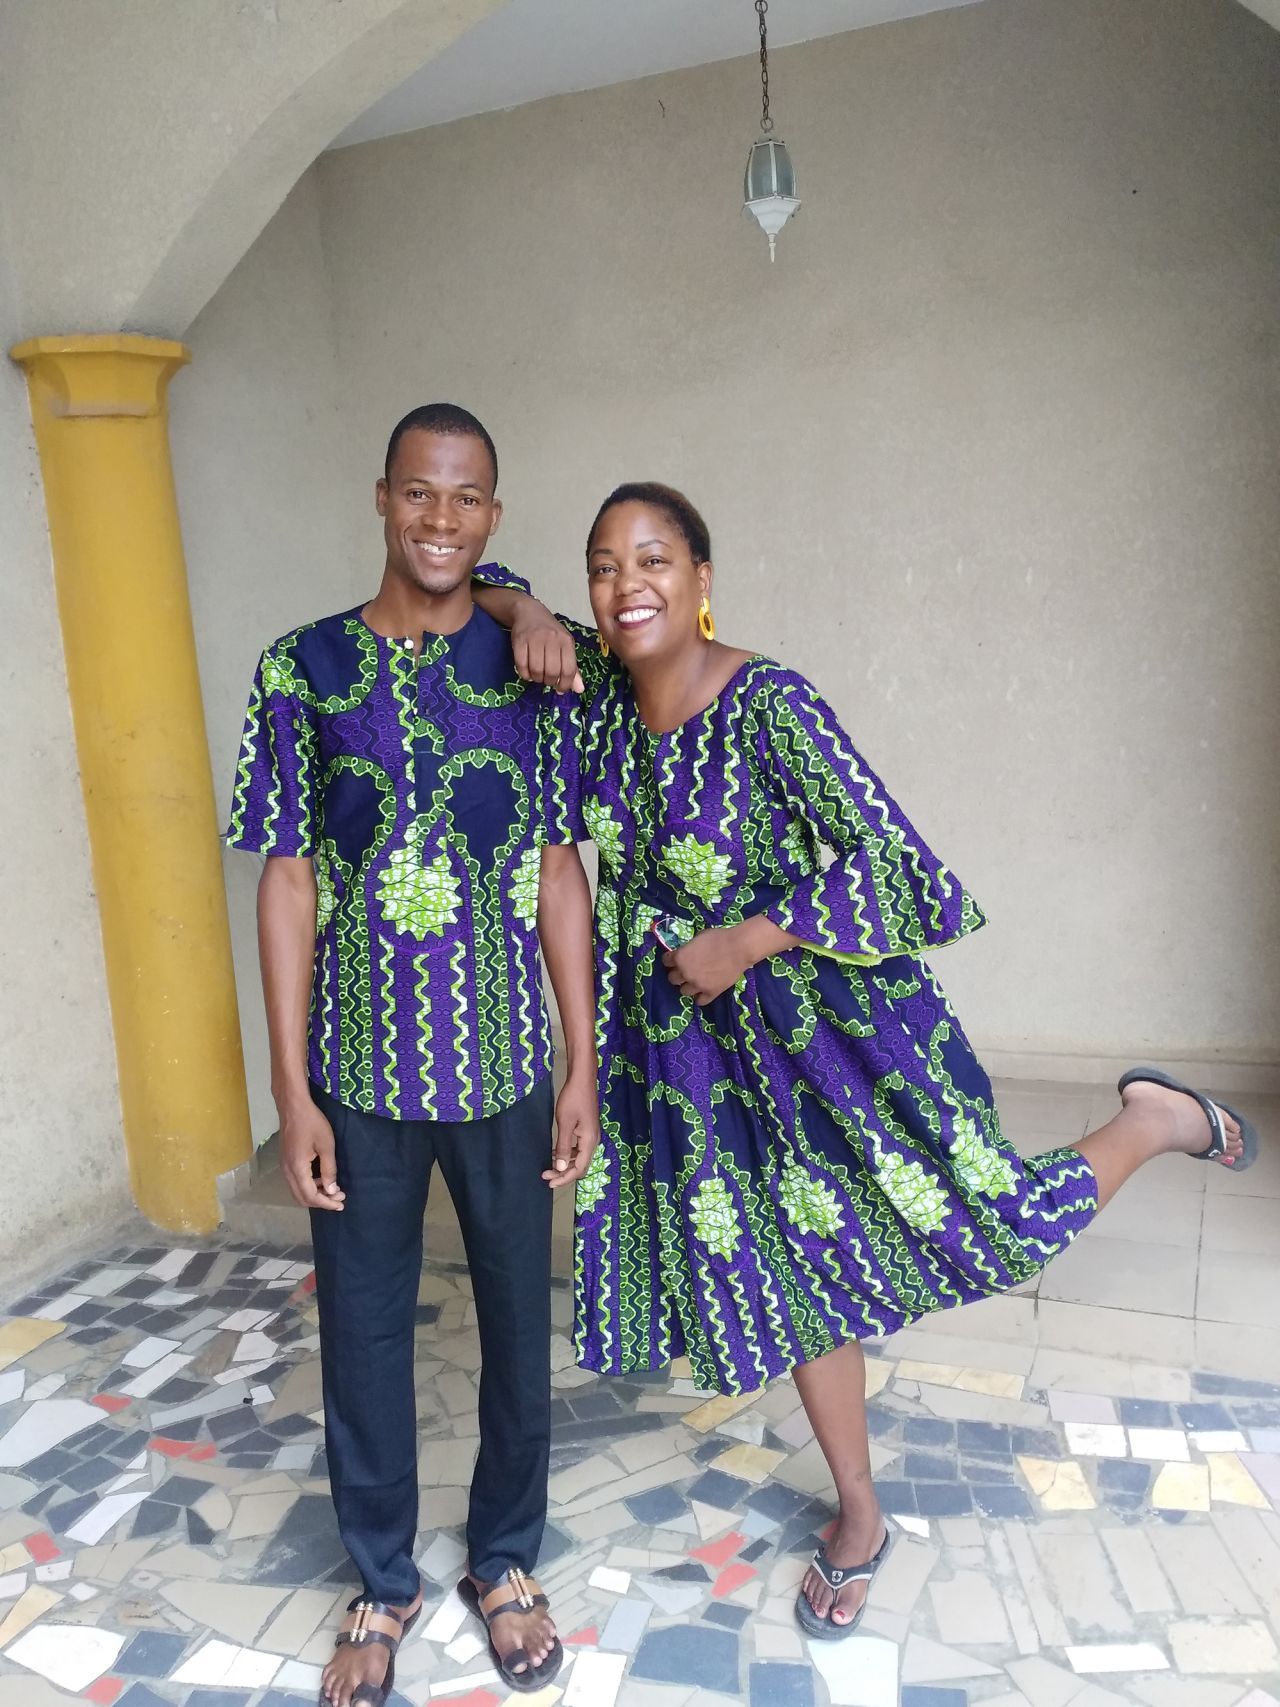 Honoré and Rachel often wear clothing made from matching fabric, a Benin tradition.